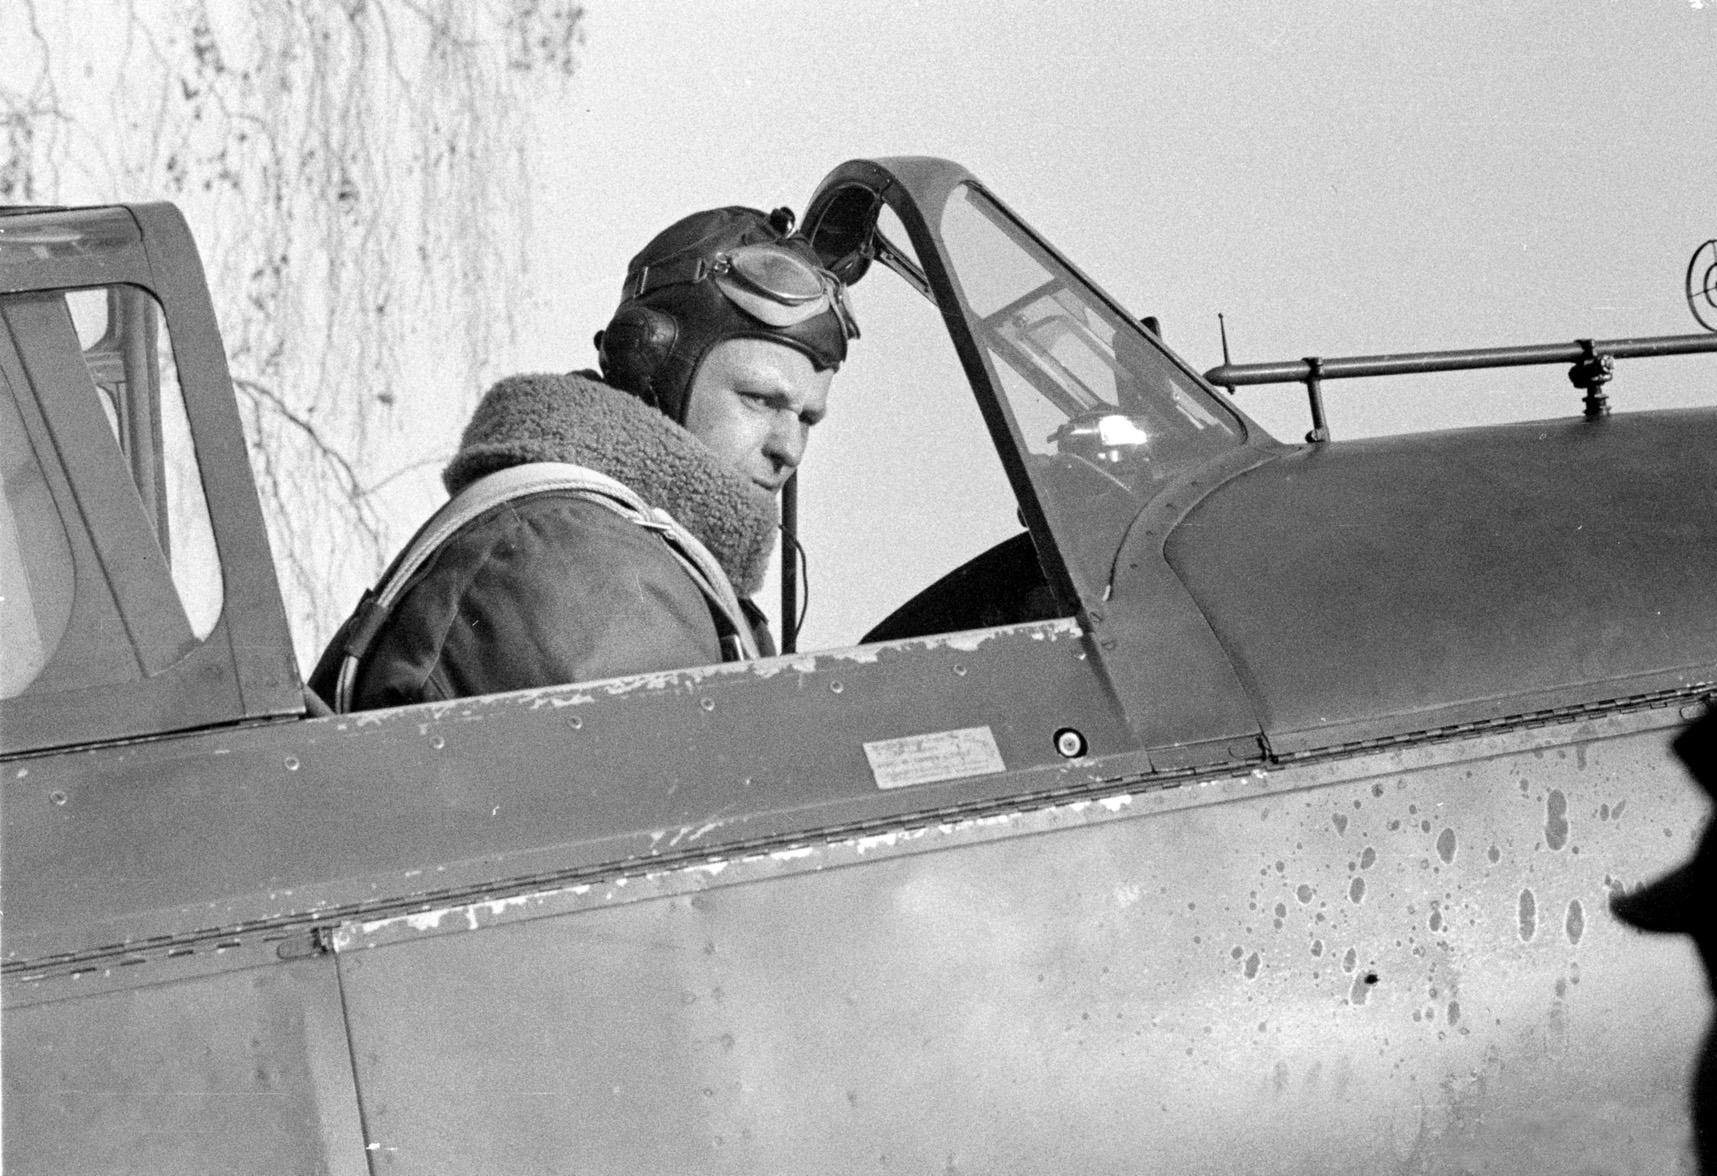 A Finnish pilot prepares to take off on a frigid day in his French-built Morane-Saulnier MS406 C-1 fighter, one of the fastest (250 mph) and most modern in Finland’s arsenal.